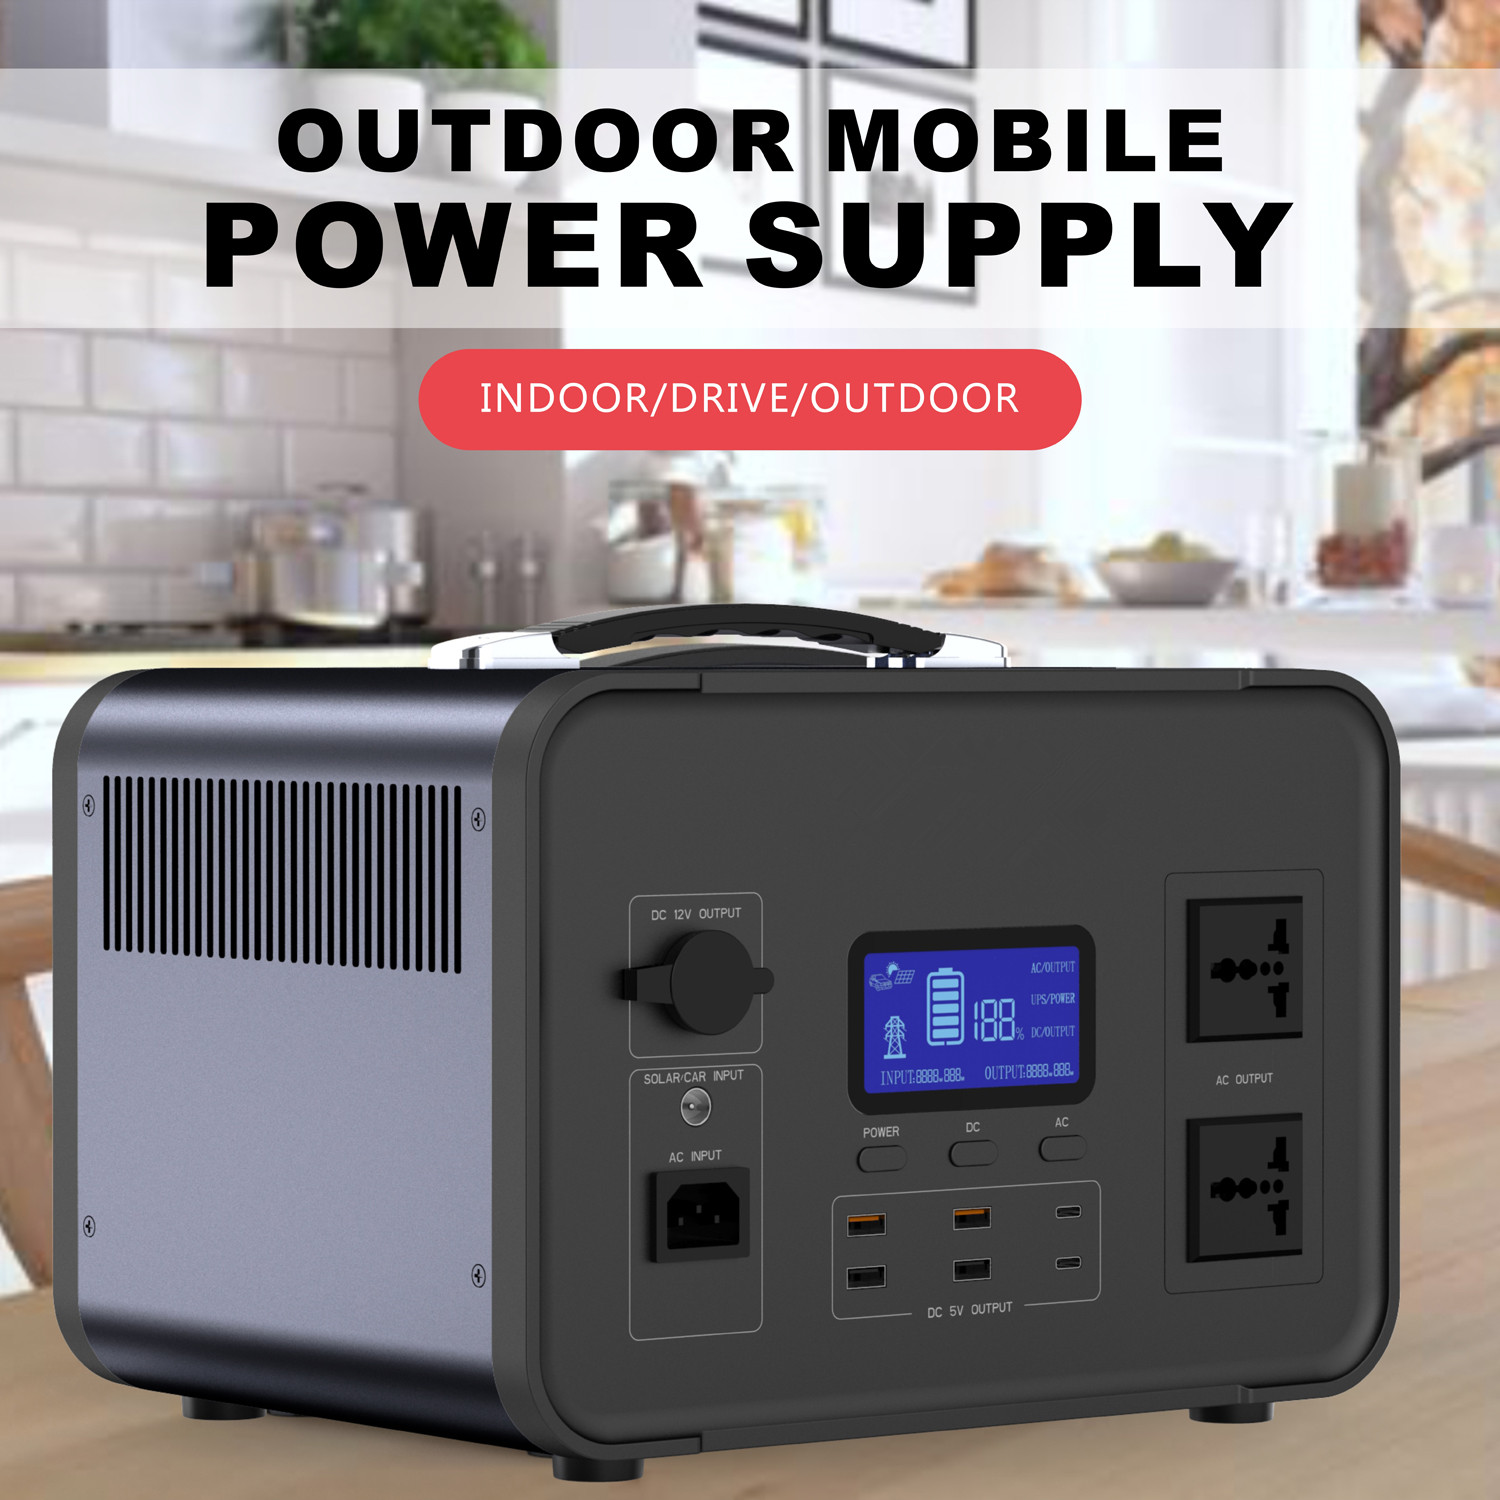 Application of outdoor power supply in life and work